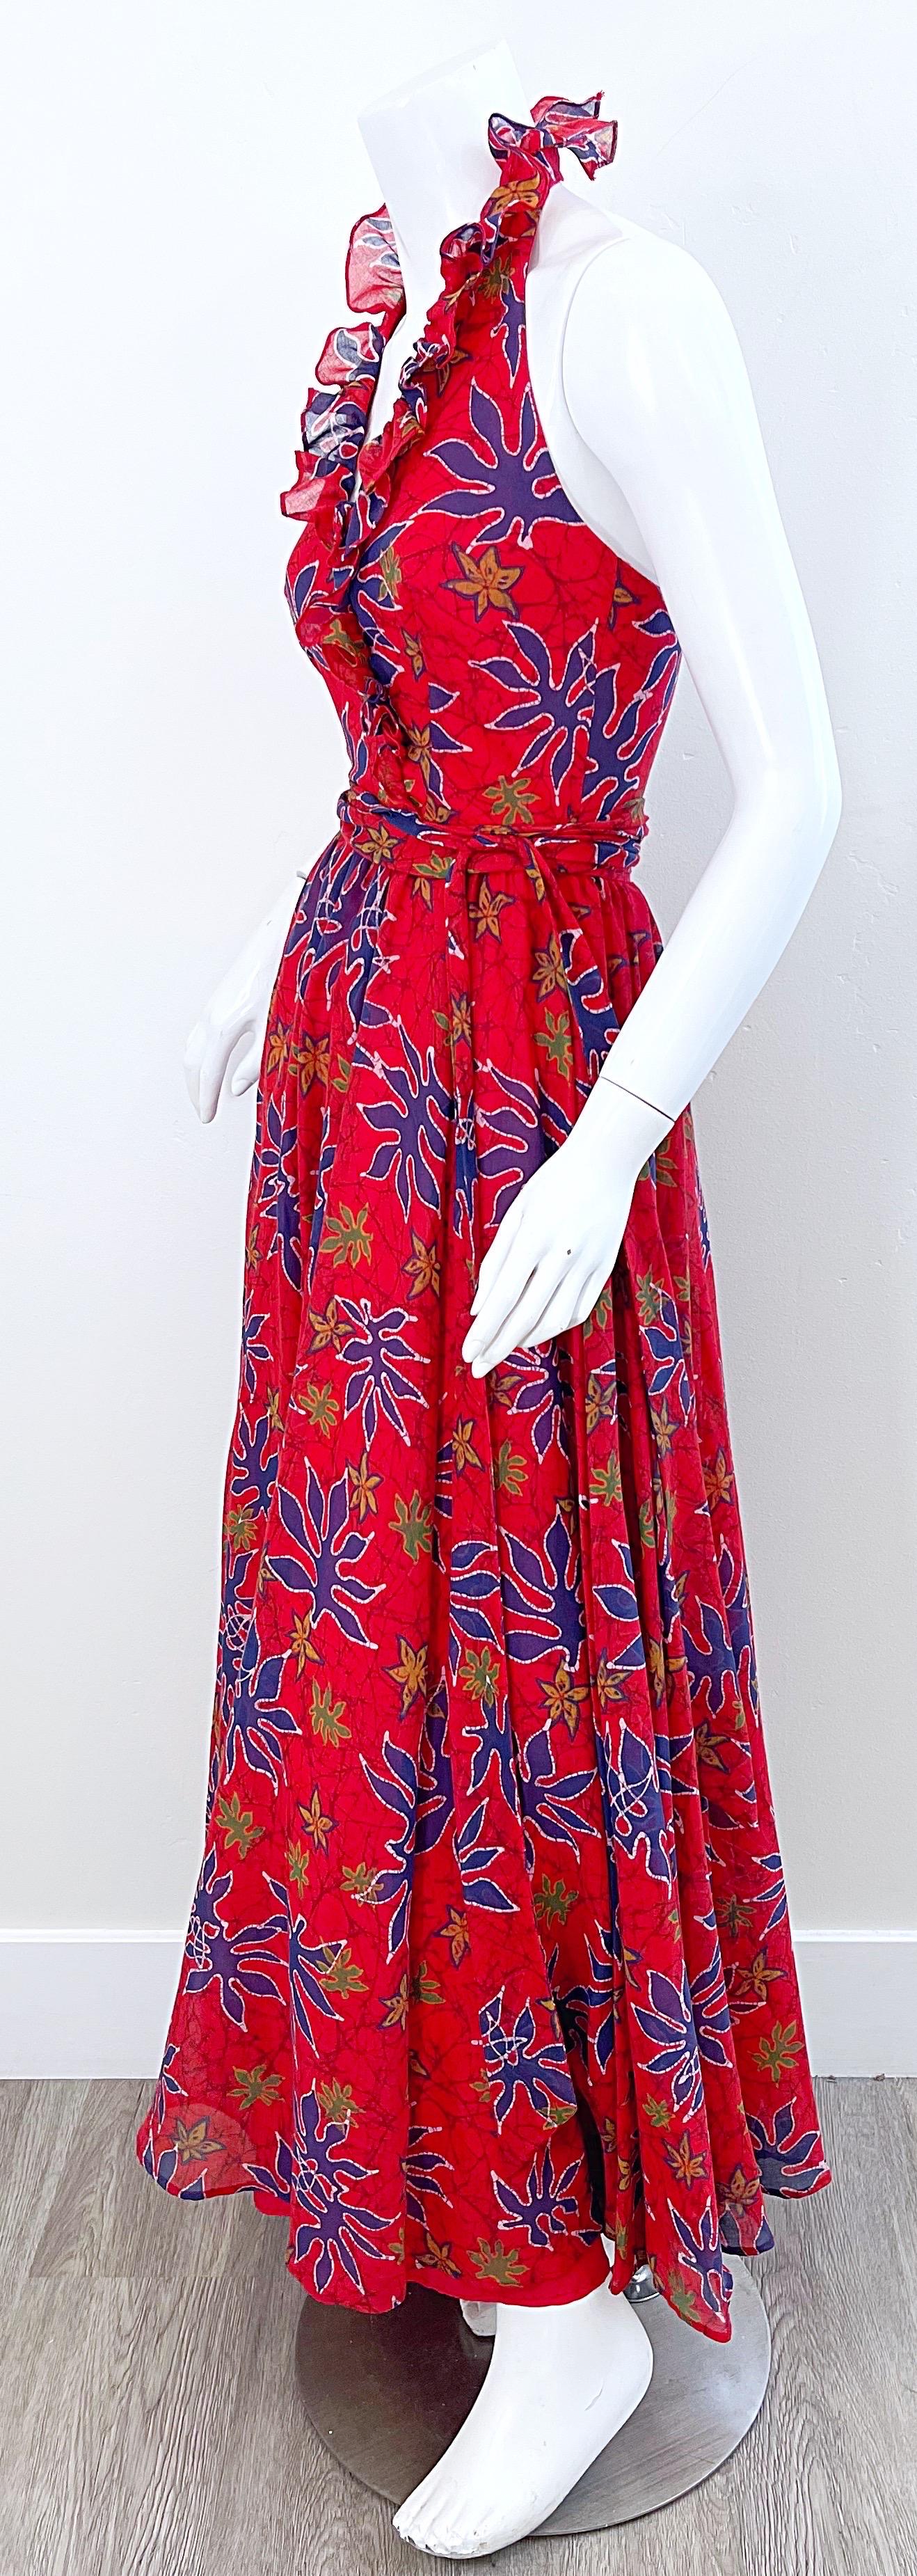 Lilli Diamond 1970s Sz 2 Abstract Leaf Print Red Halter Cotton Voile Maxi Dress For Sale 2